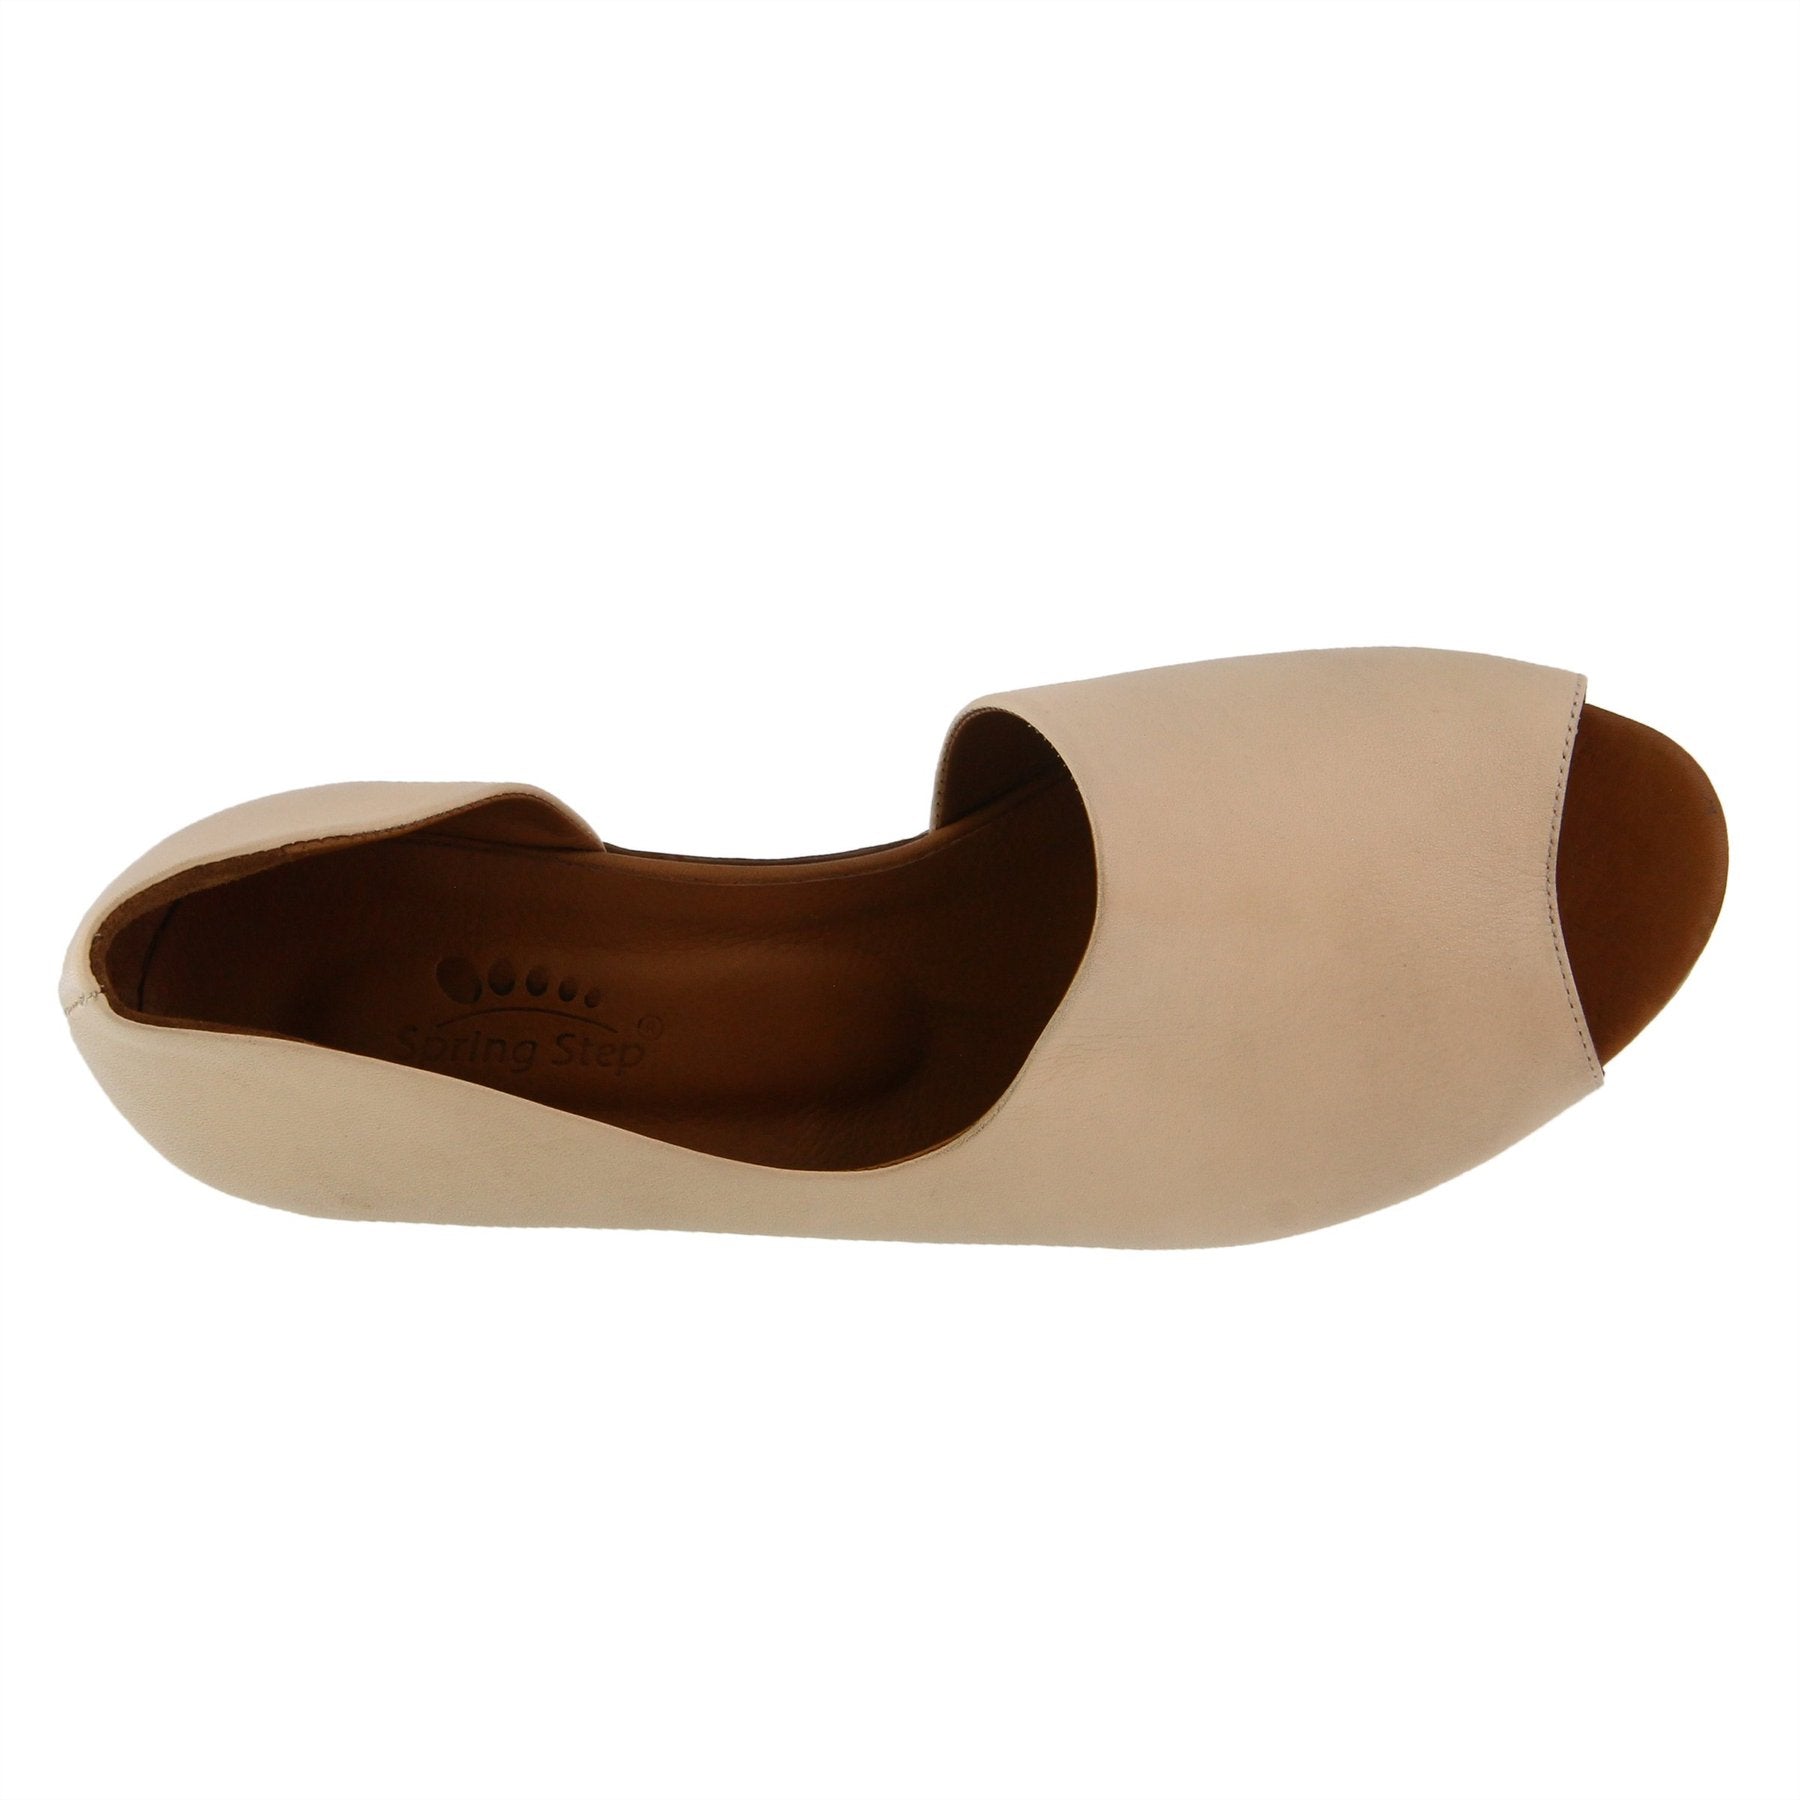 Birdseye view of the Spring Step Lesamarie Shoe. This shoe is a light beige with a tan leather inner and slight wedge heel. The outer side covers the foot while in inner side reveals the arch. This shoe is also open toed.